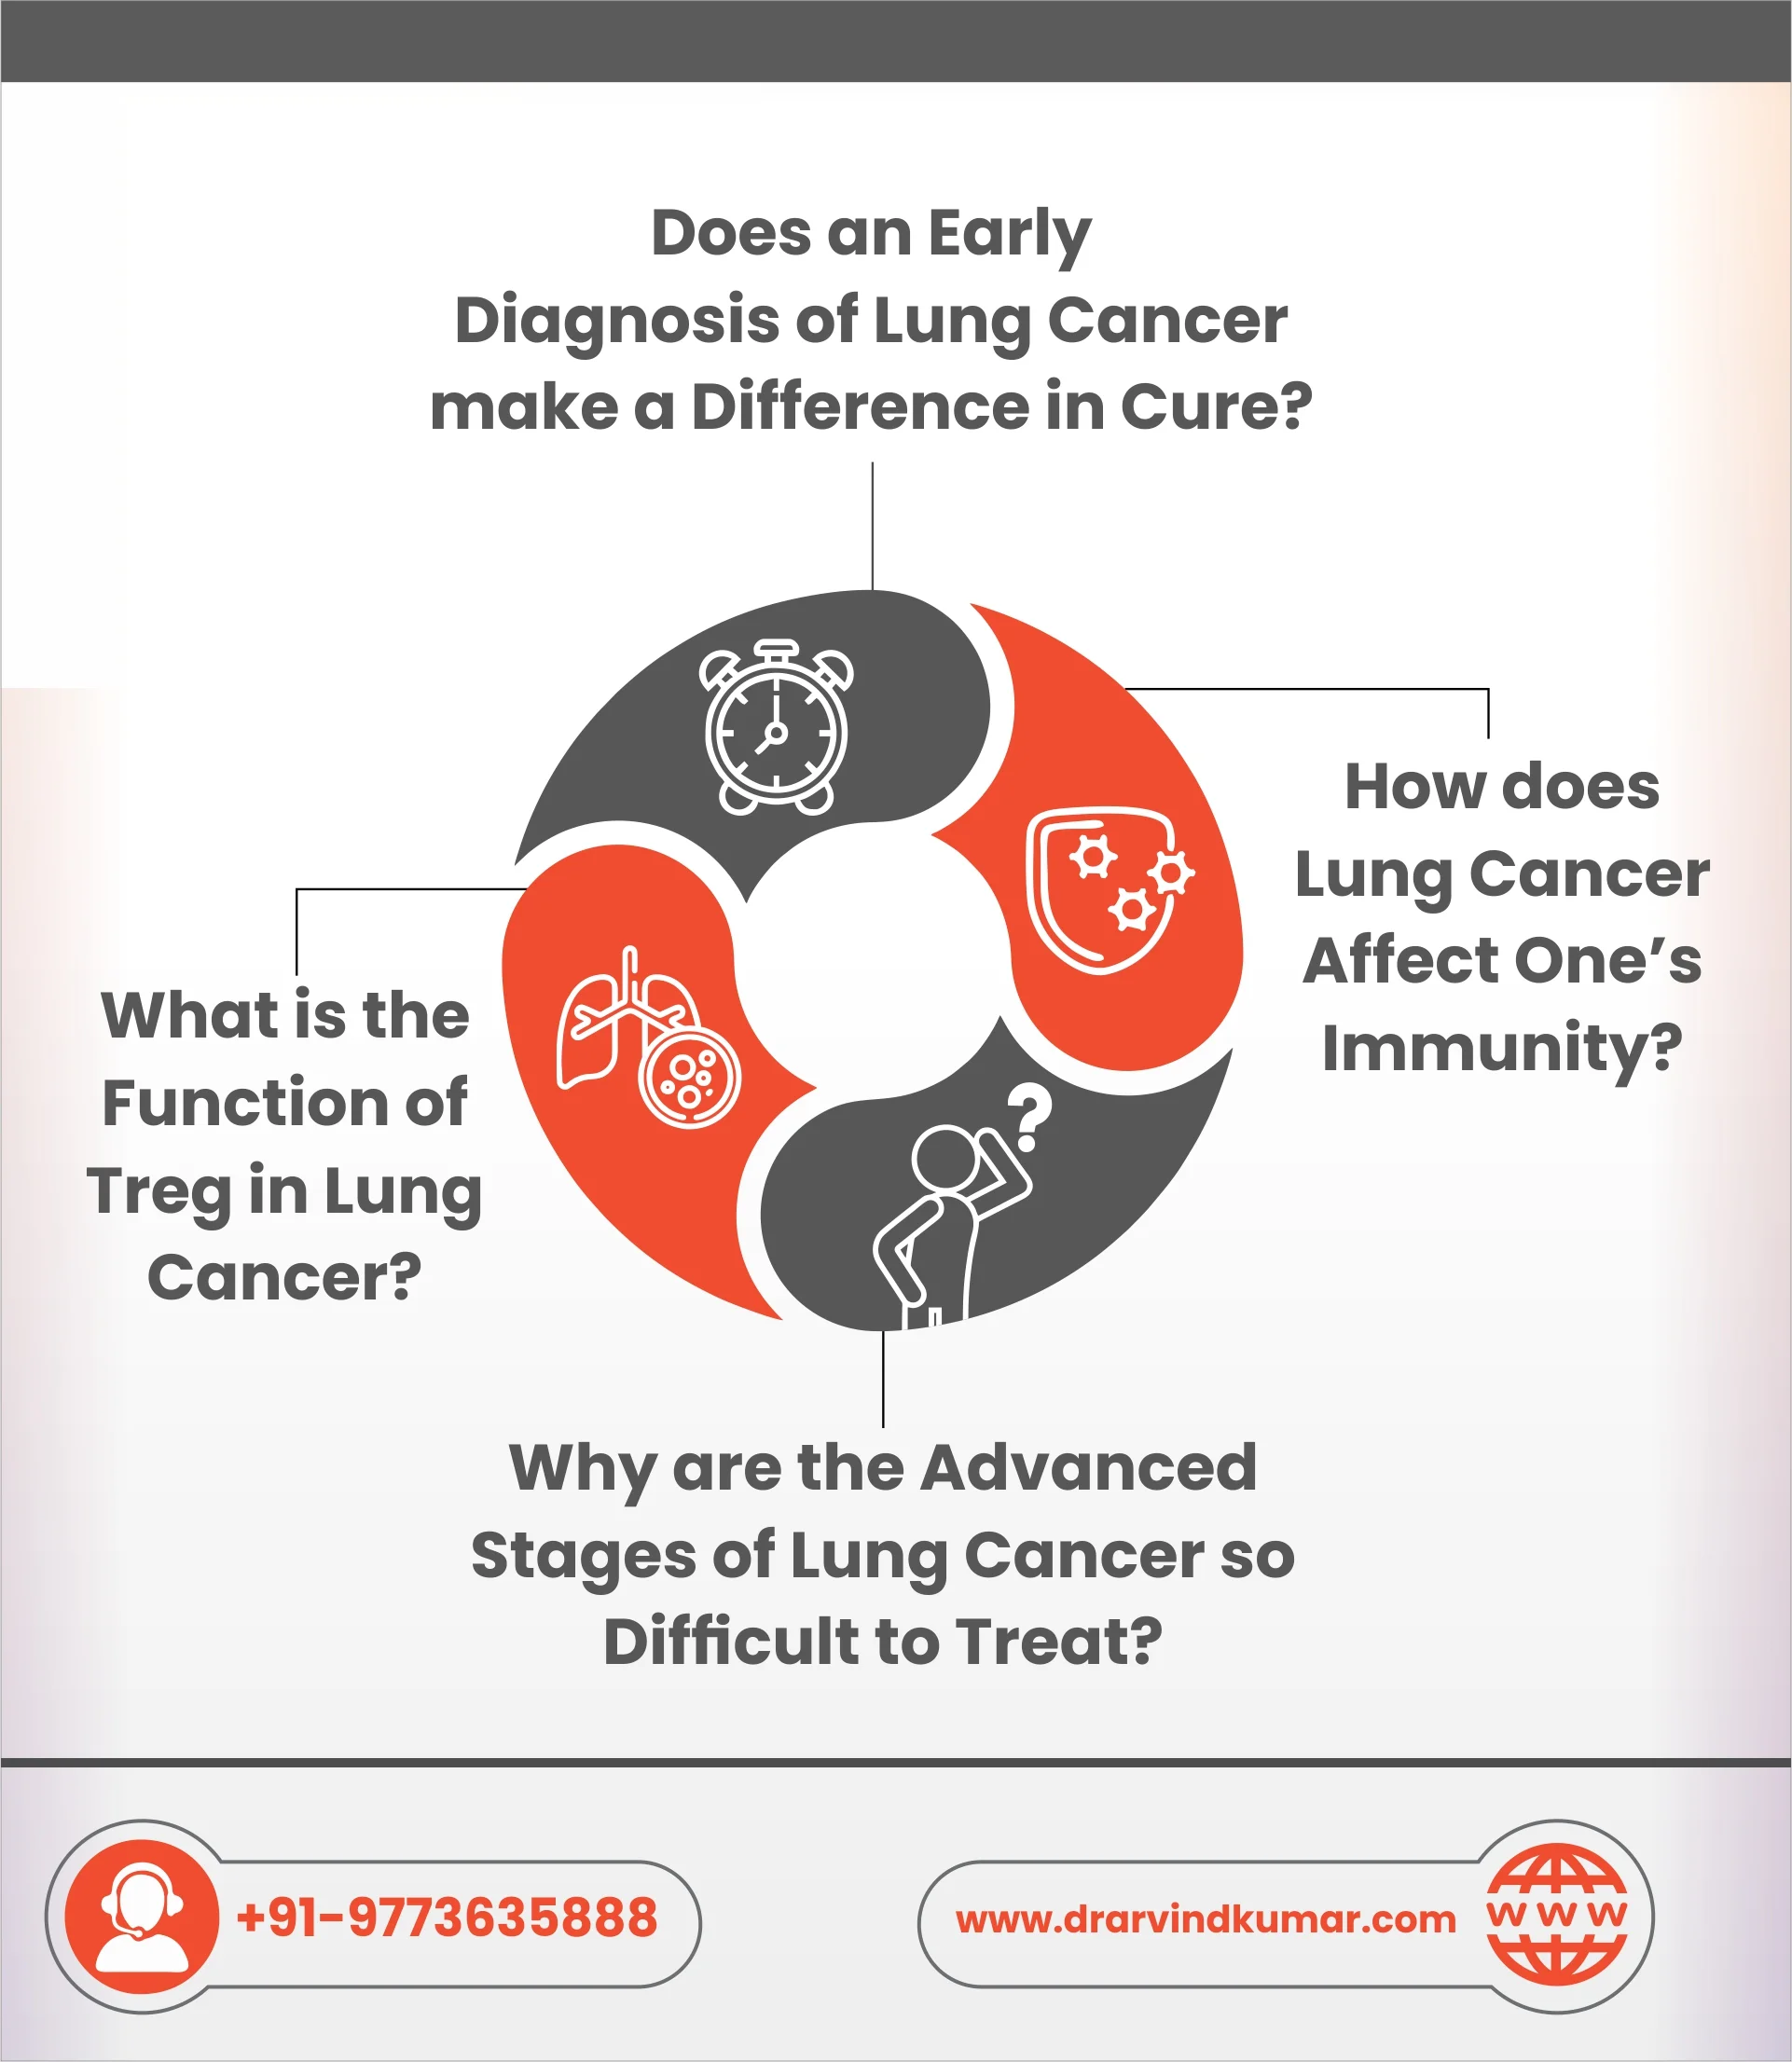 Is Lung Cancer Difficult to Cure?